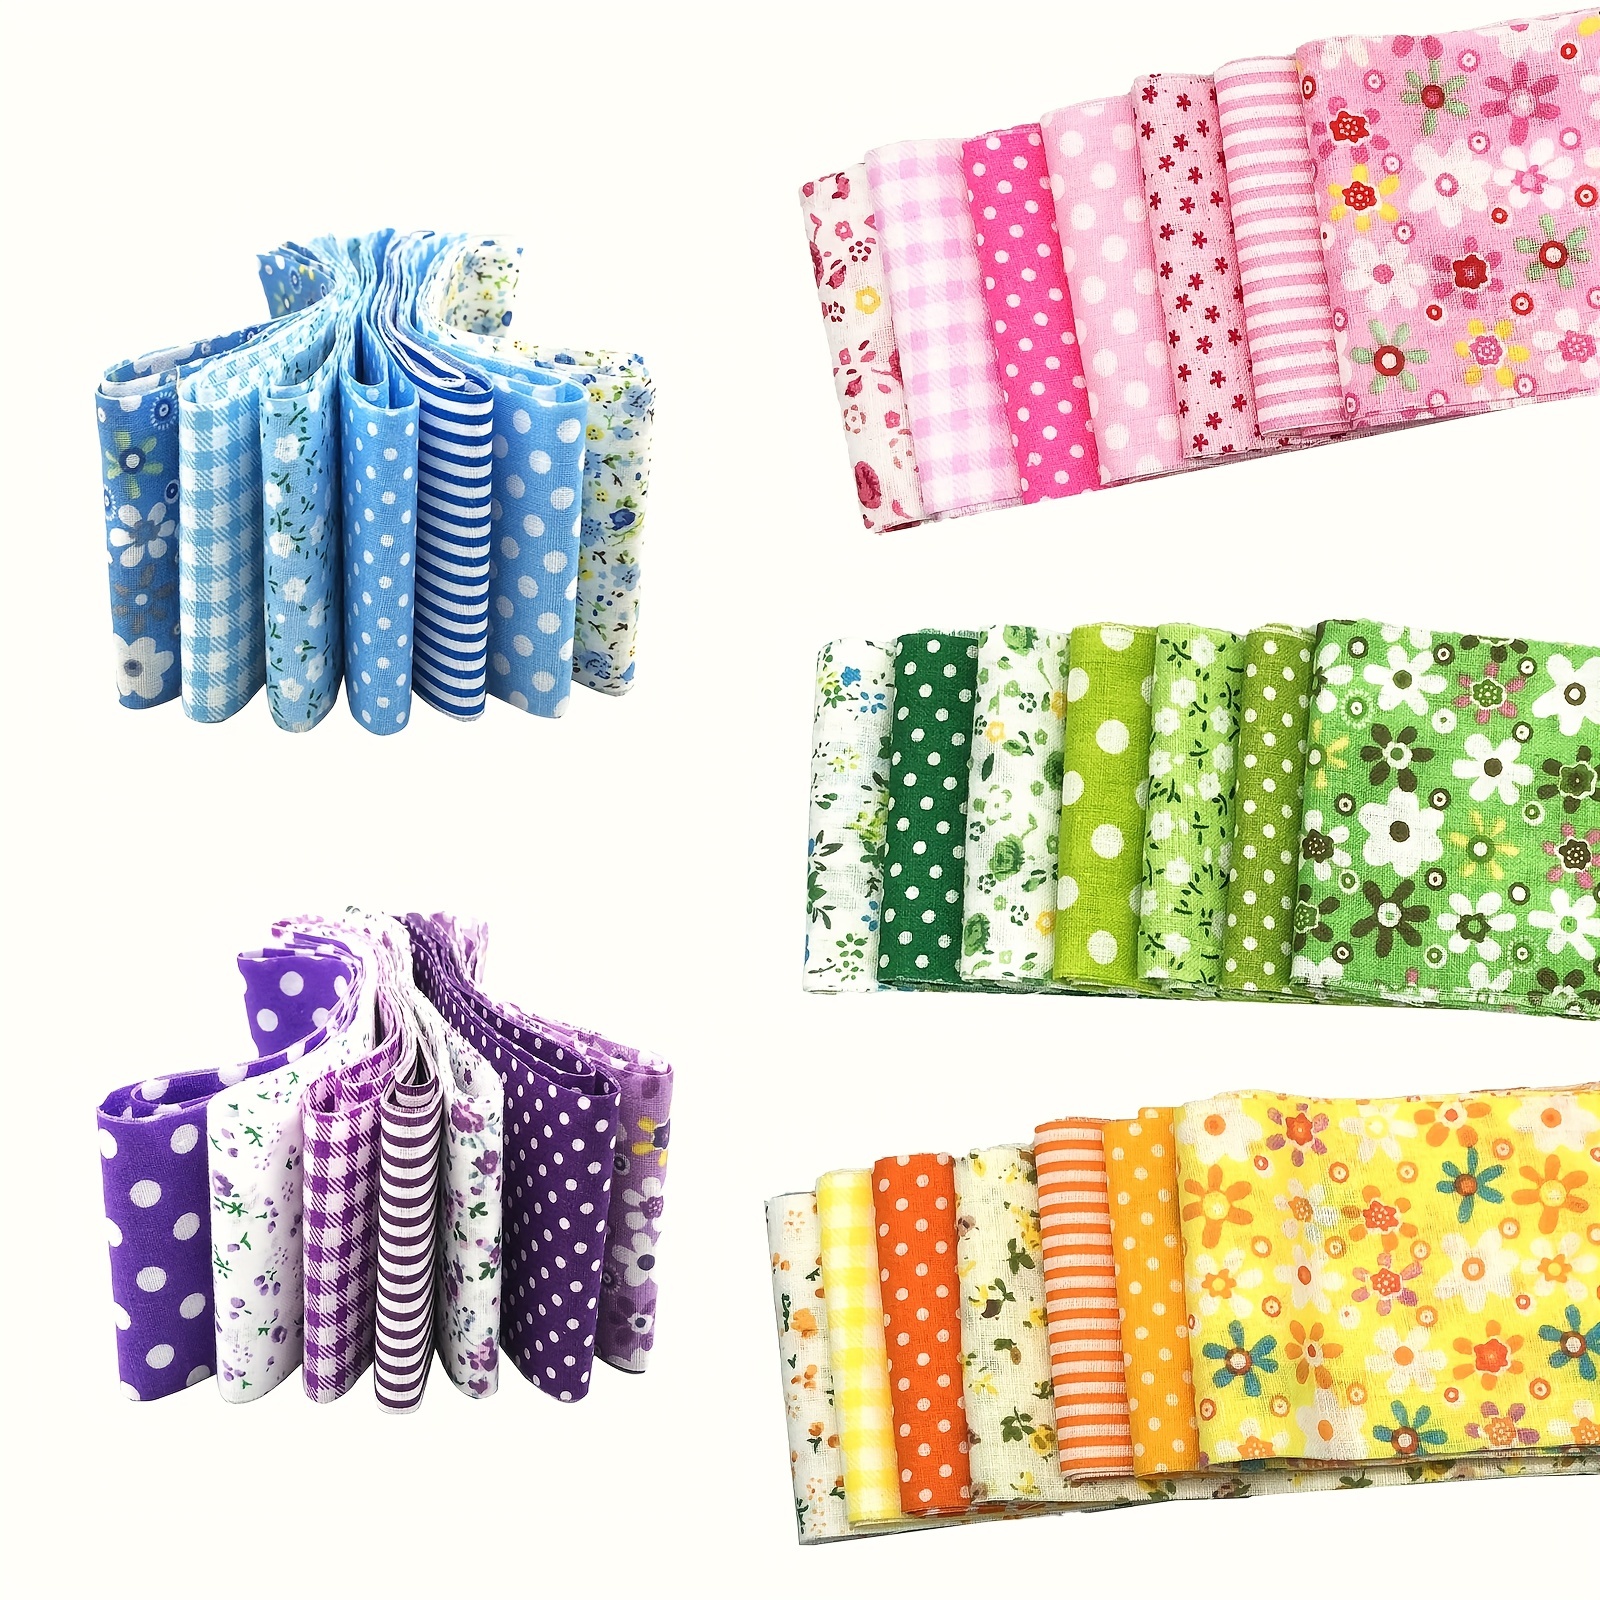 HOT SALE Fabric Strips Roll Jelly Fabric Bundles Fabric Quilting Strips Roll  Up Flower Precut Patchwork